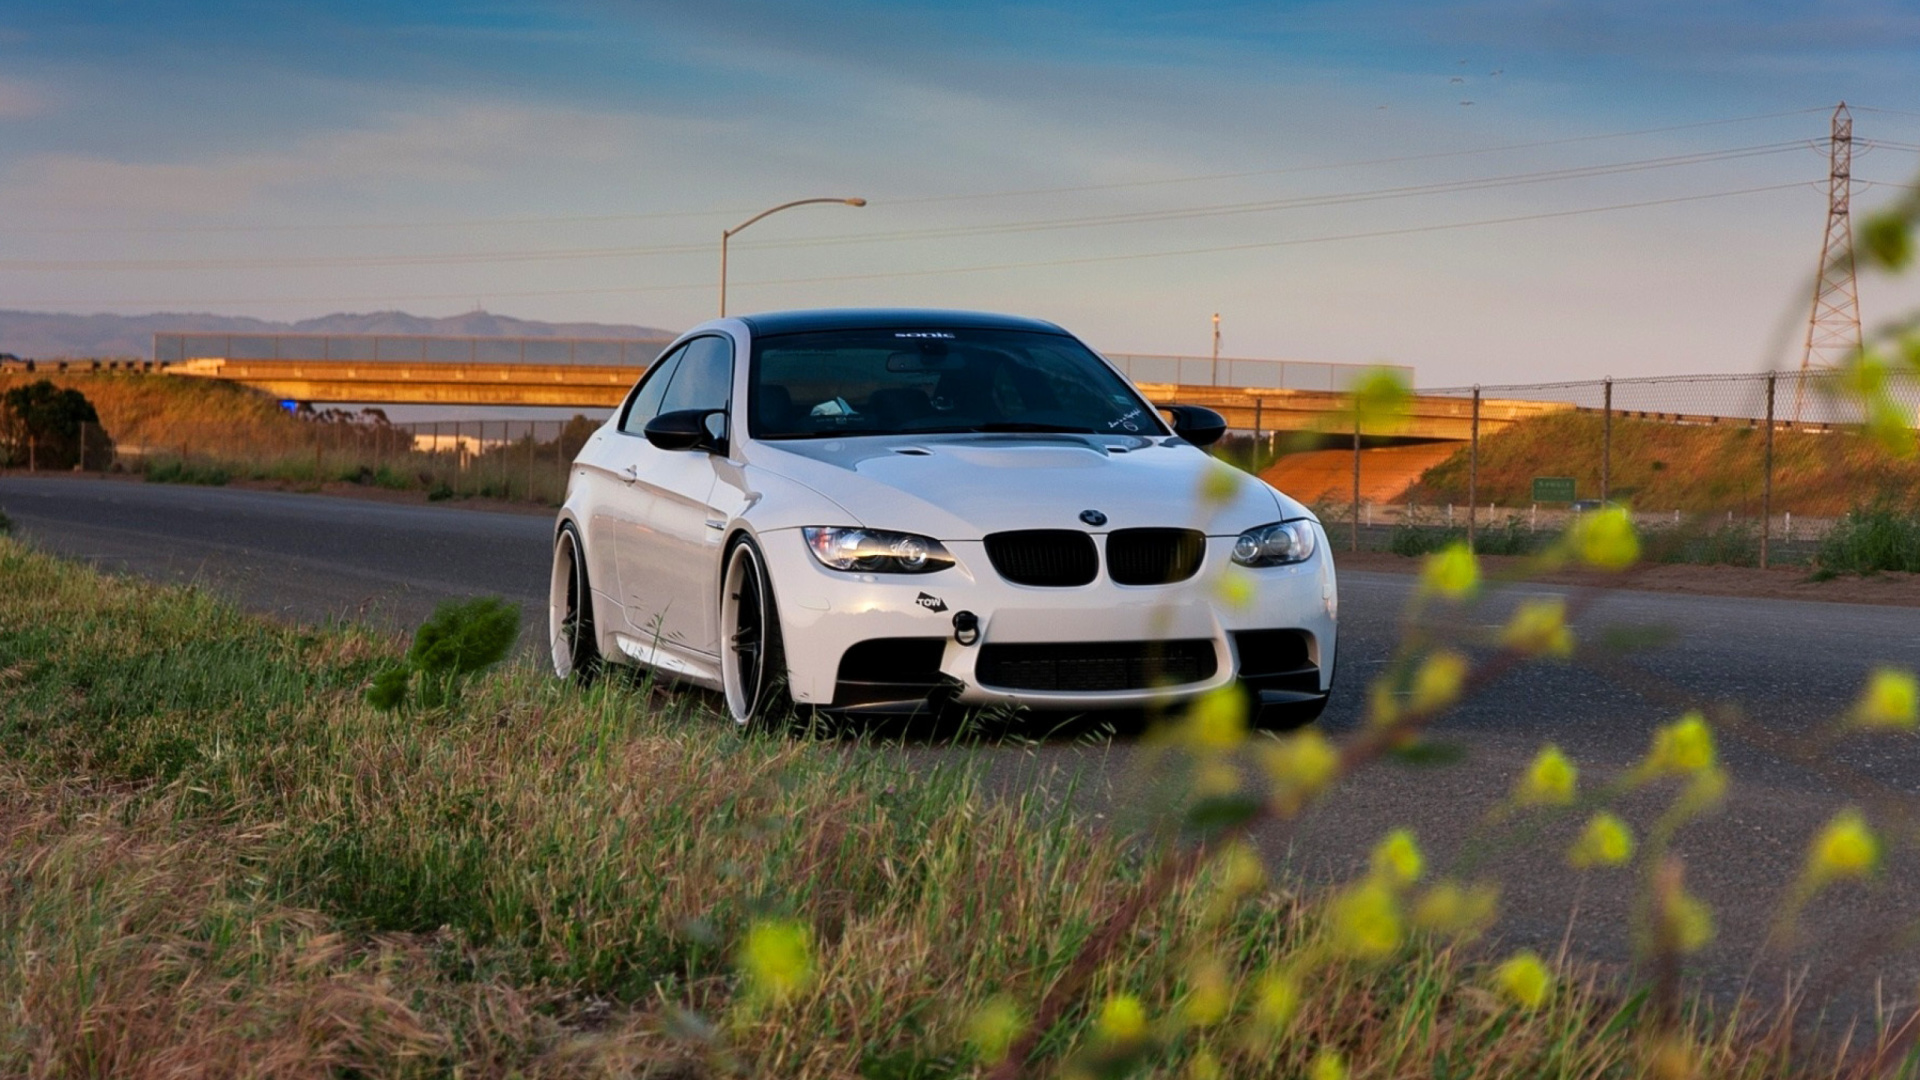 BMW M3 with Wheels 19 wallpaper 1920x1080